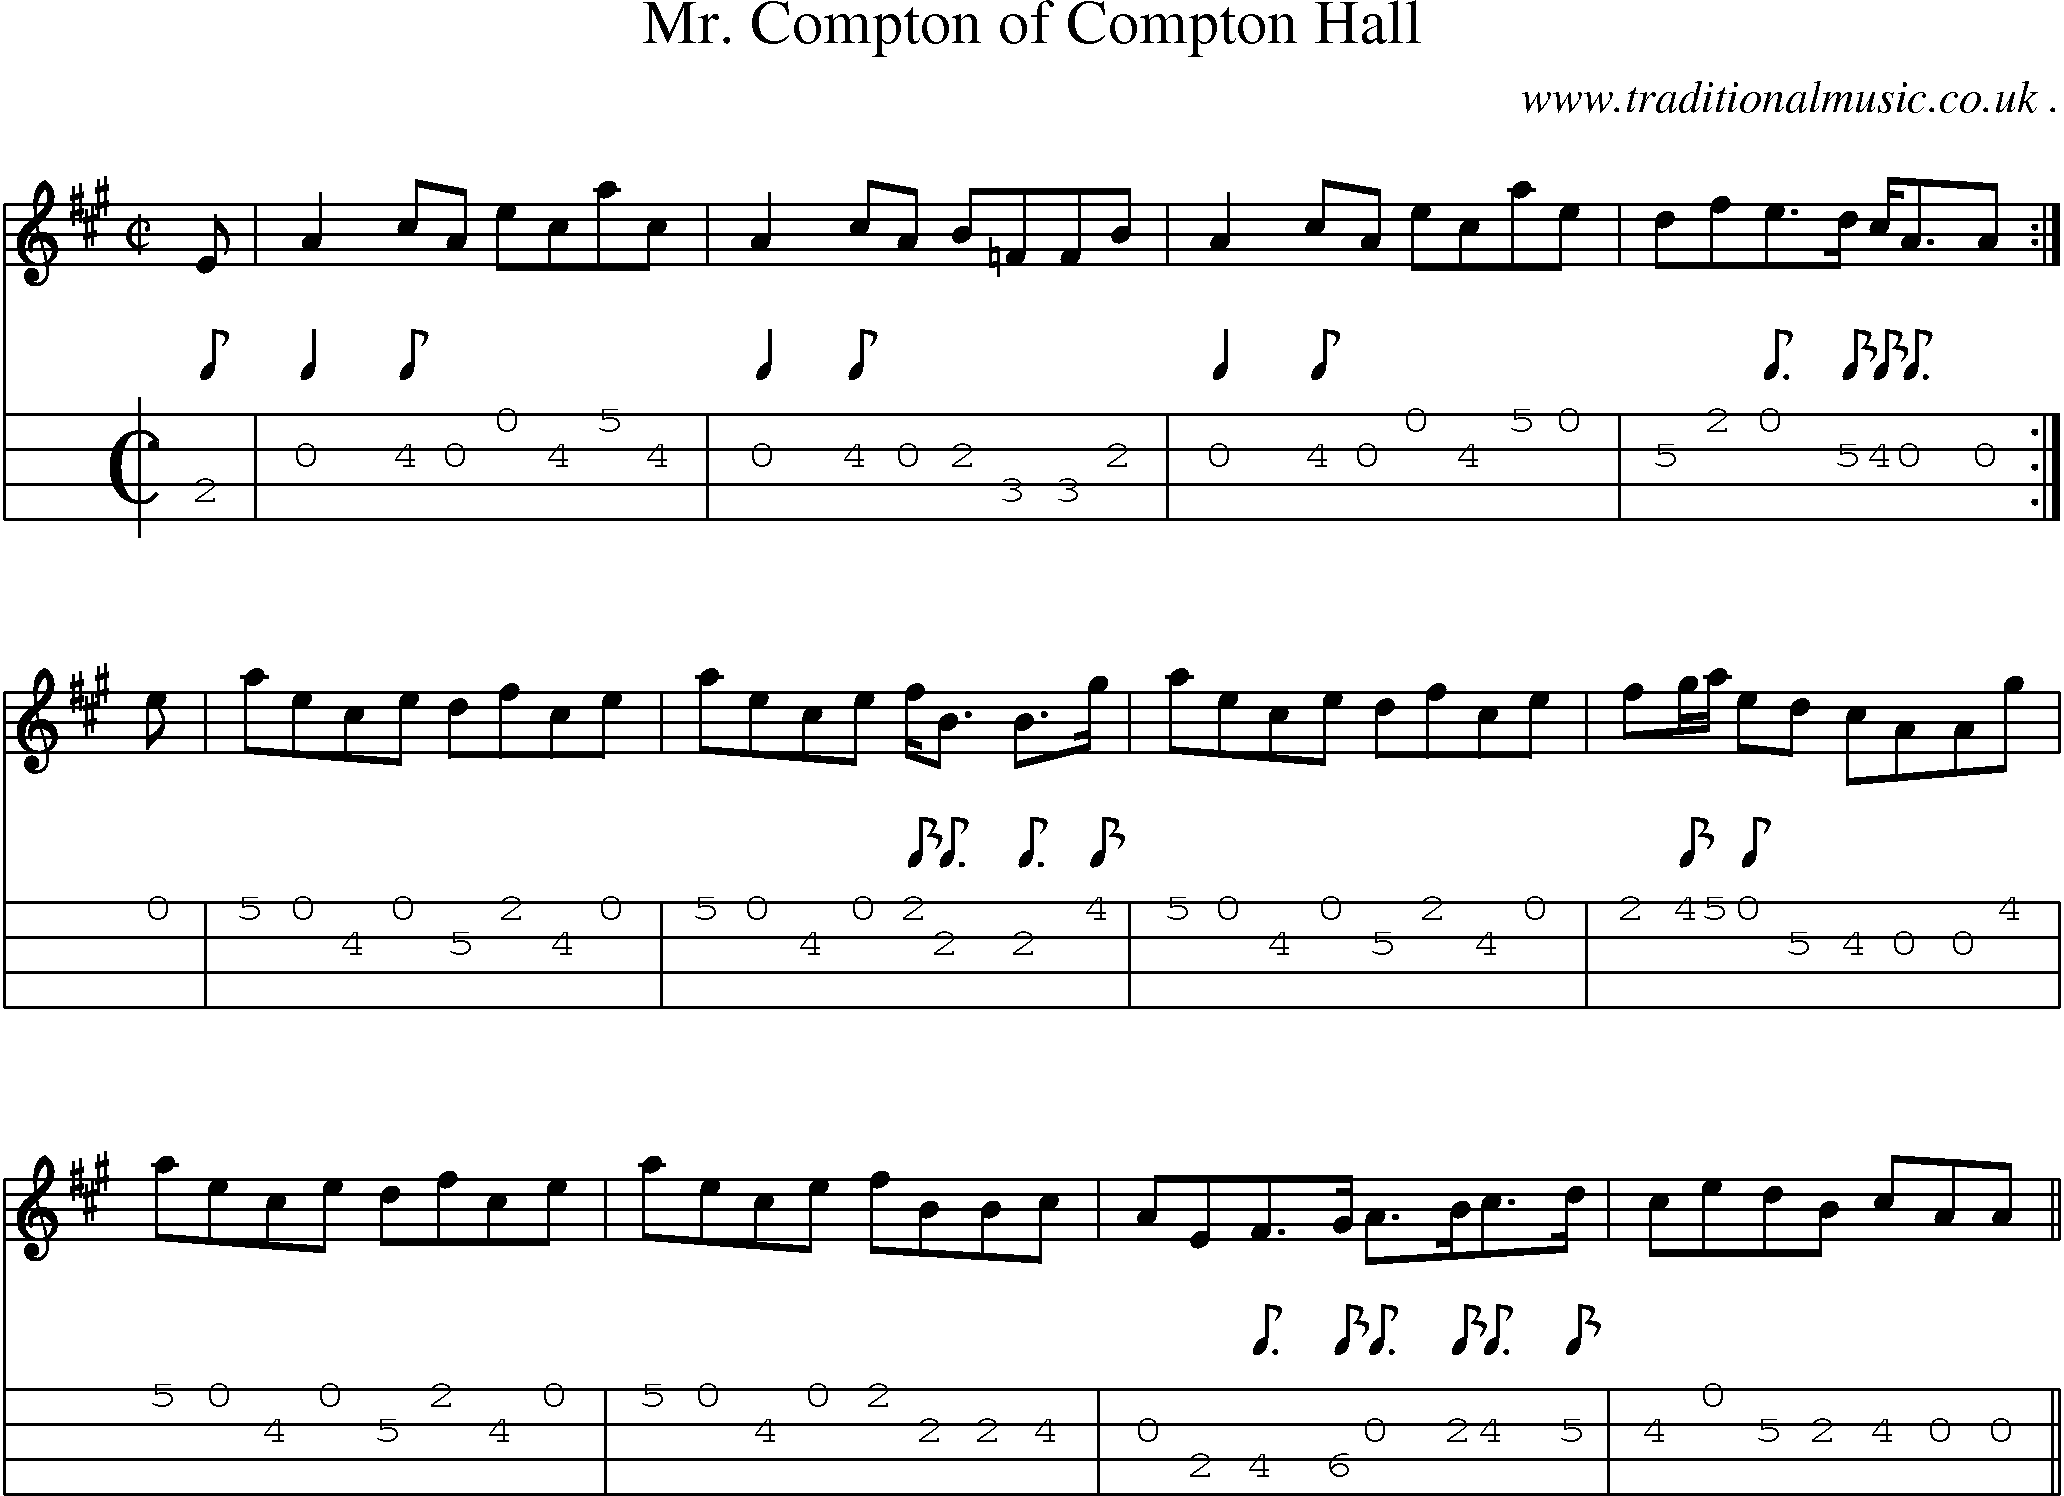 Sheet-music  score, Chords and Mandolin Tabs for Mr Compton Of Compton Hall